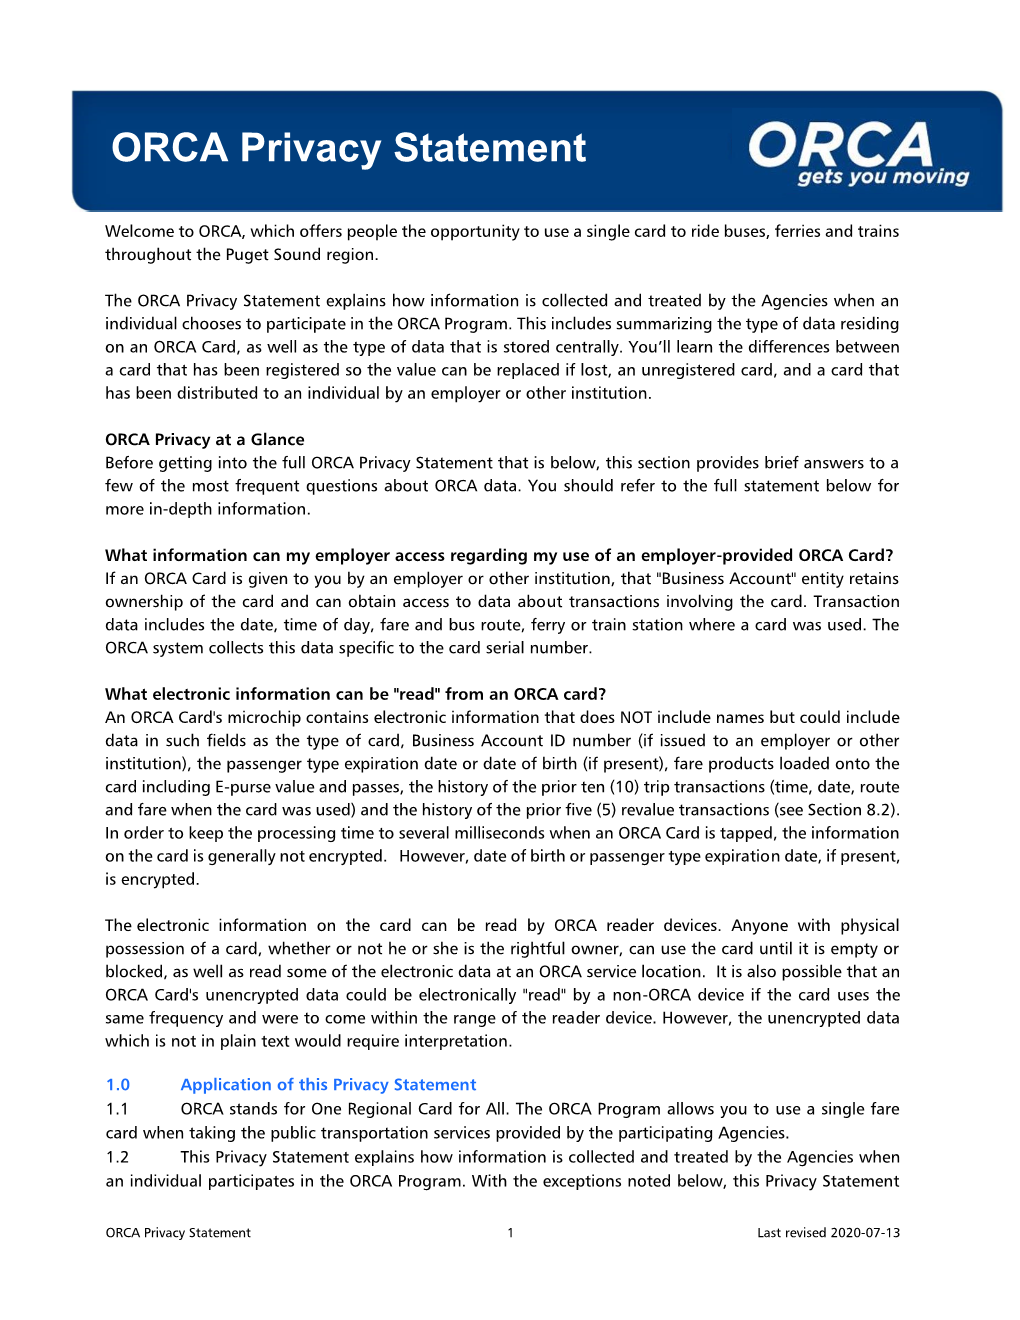 ORCA Privacy Statement Explains How Information Is Collected and Treated by the Agencies When an Individual Chooses to Participate in the ORCA Program